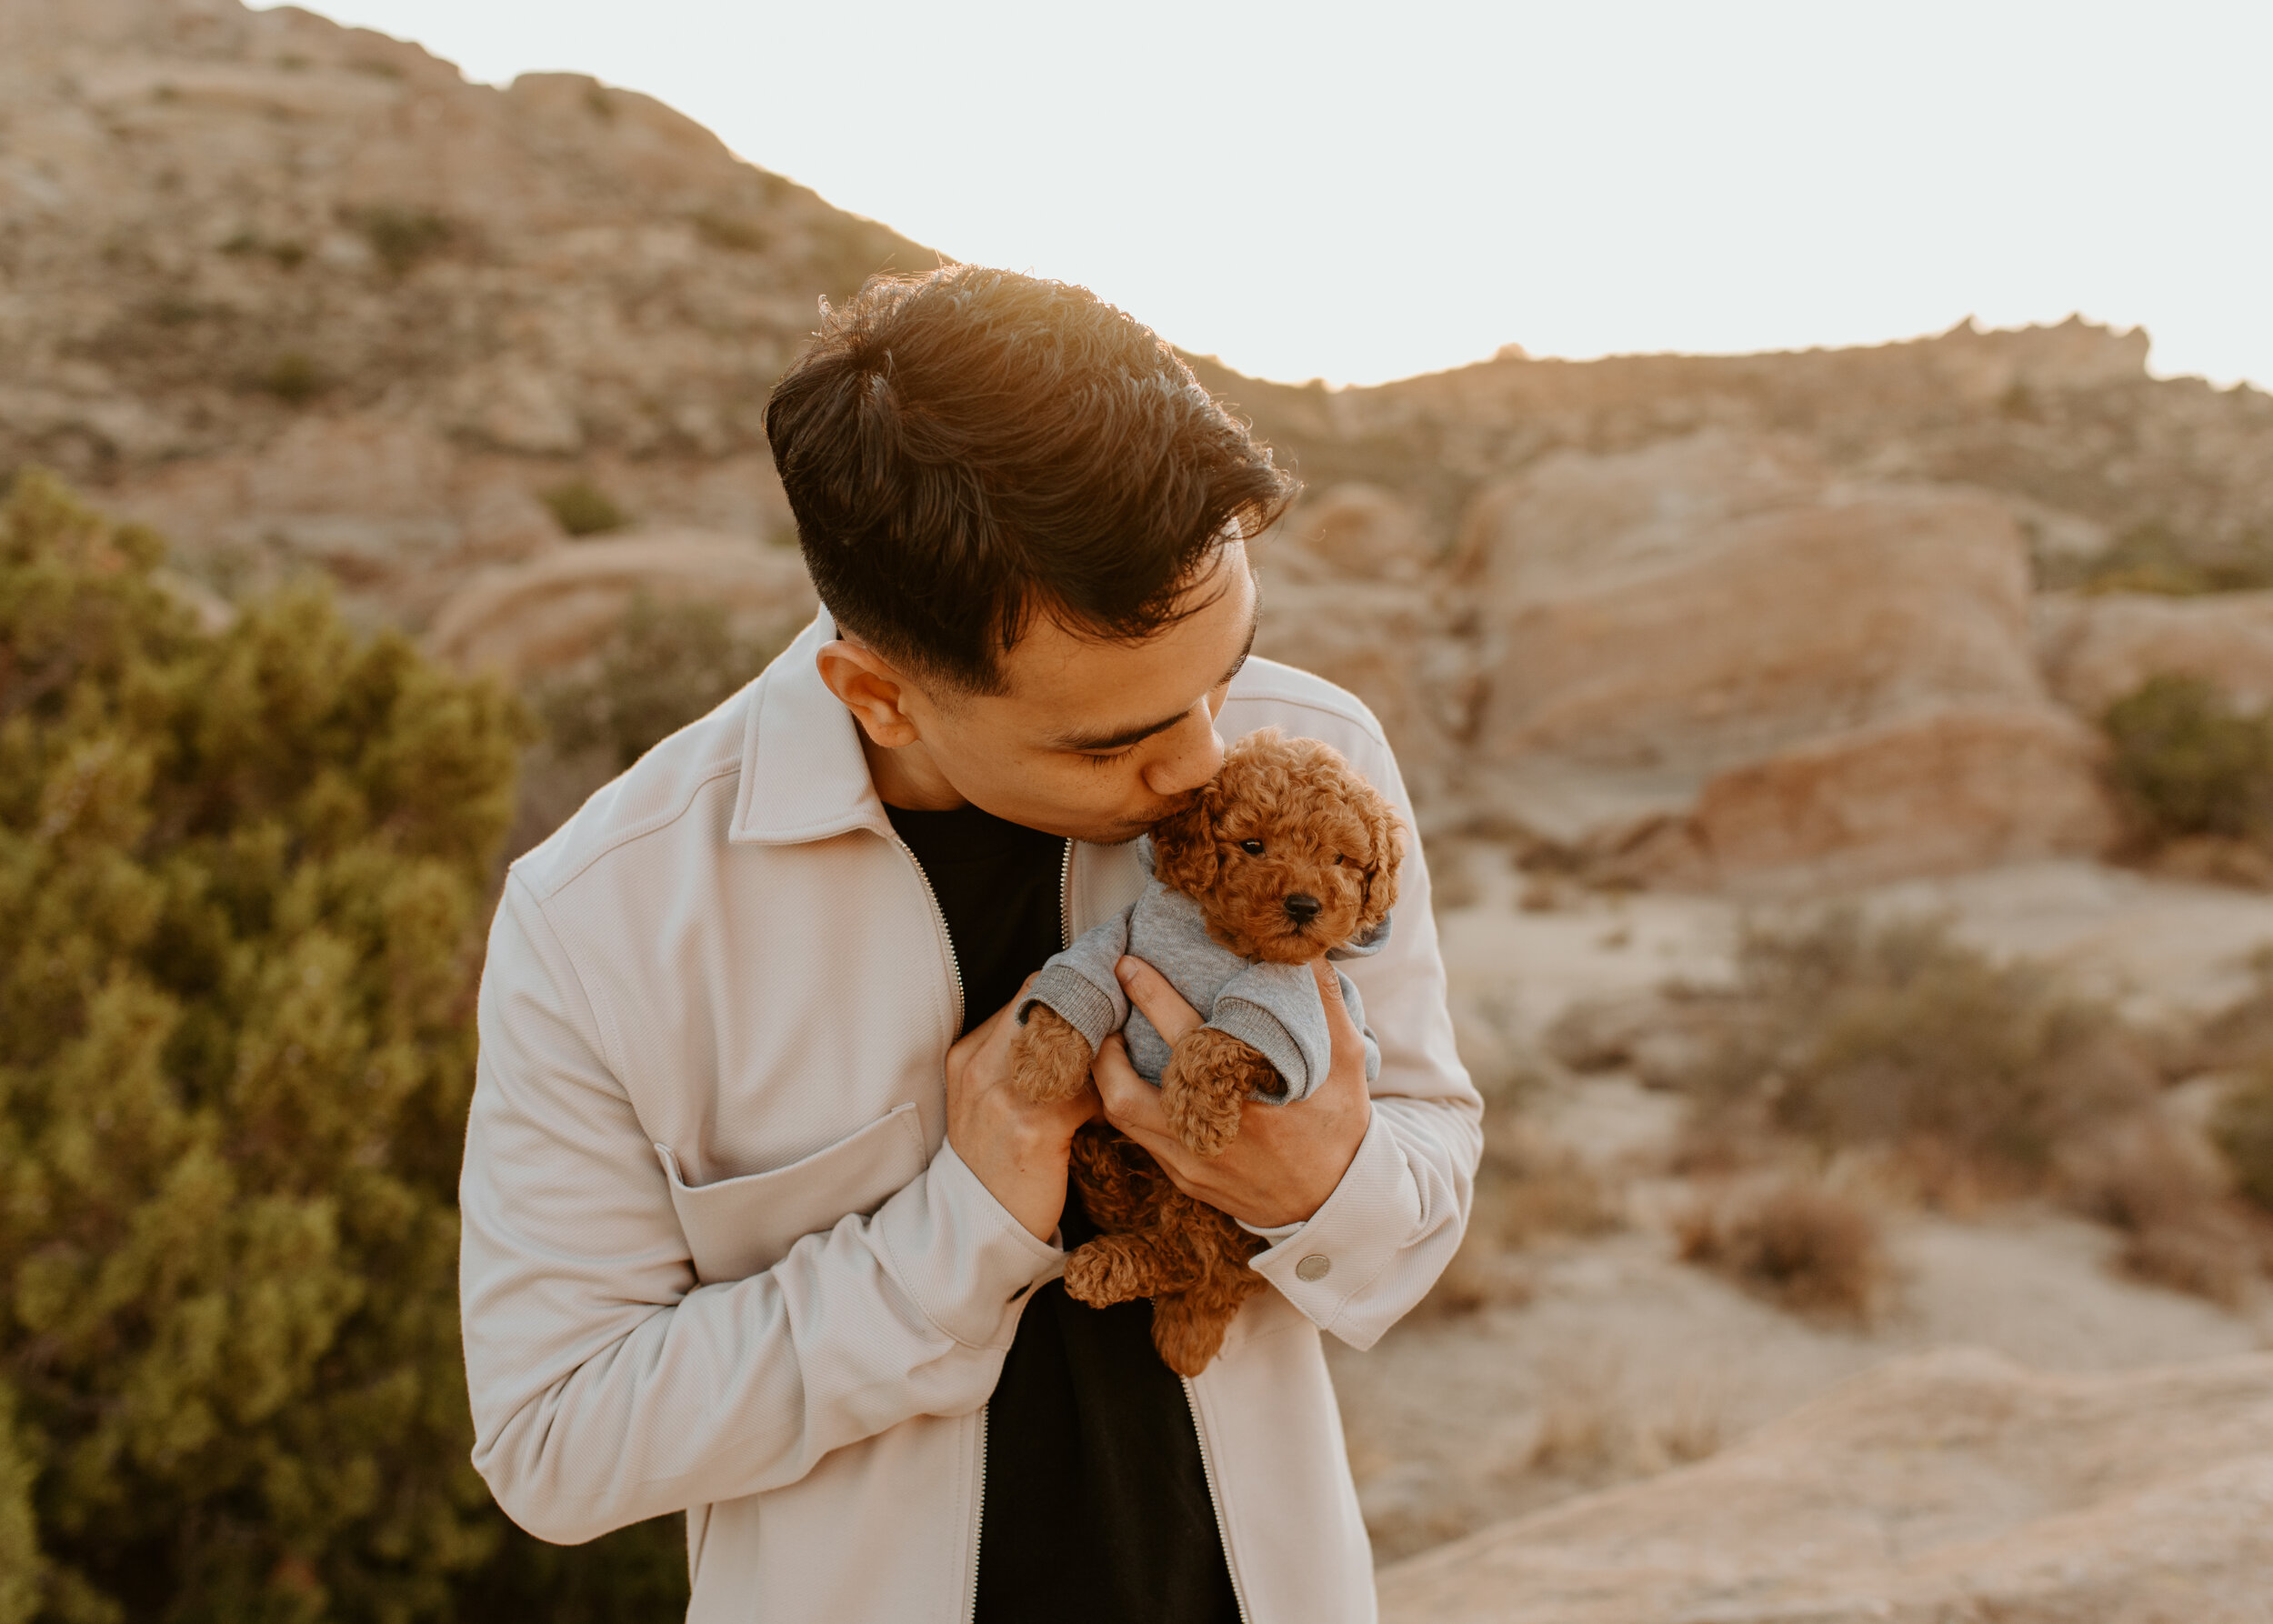 Couple photos with dog | red toy poodle puppy | earthy colored outfits for couples | what to wear for engagement session 